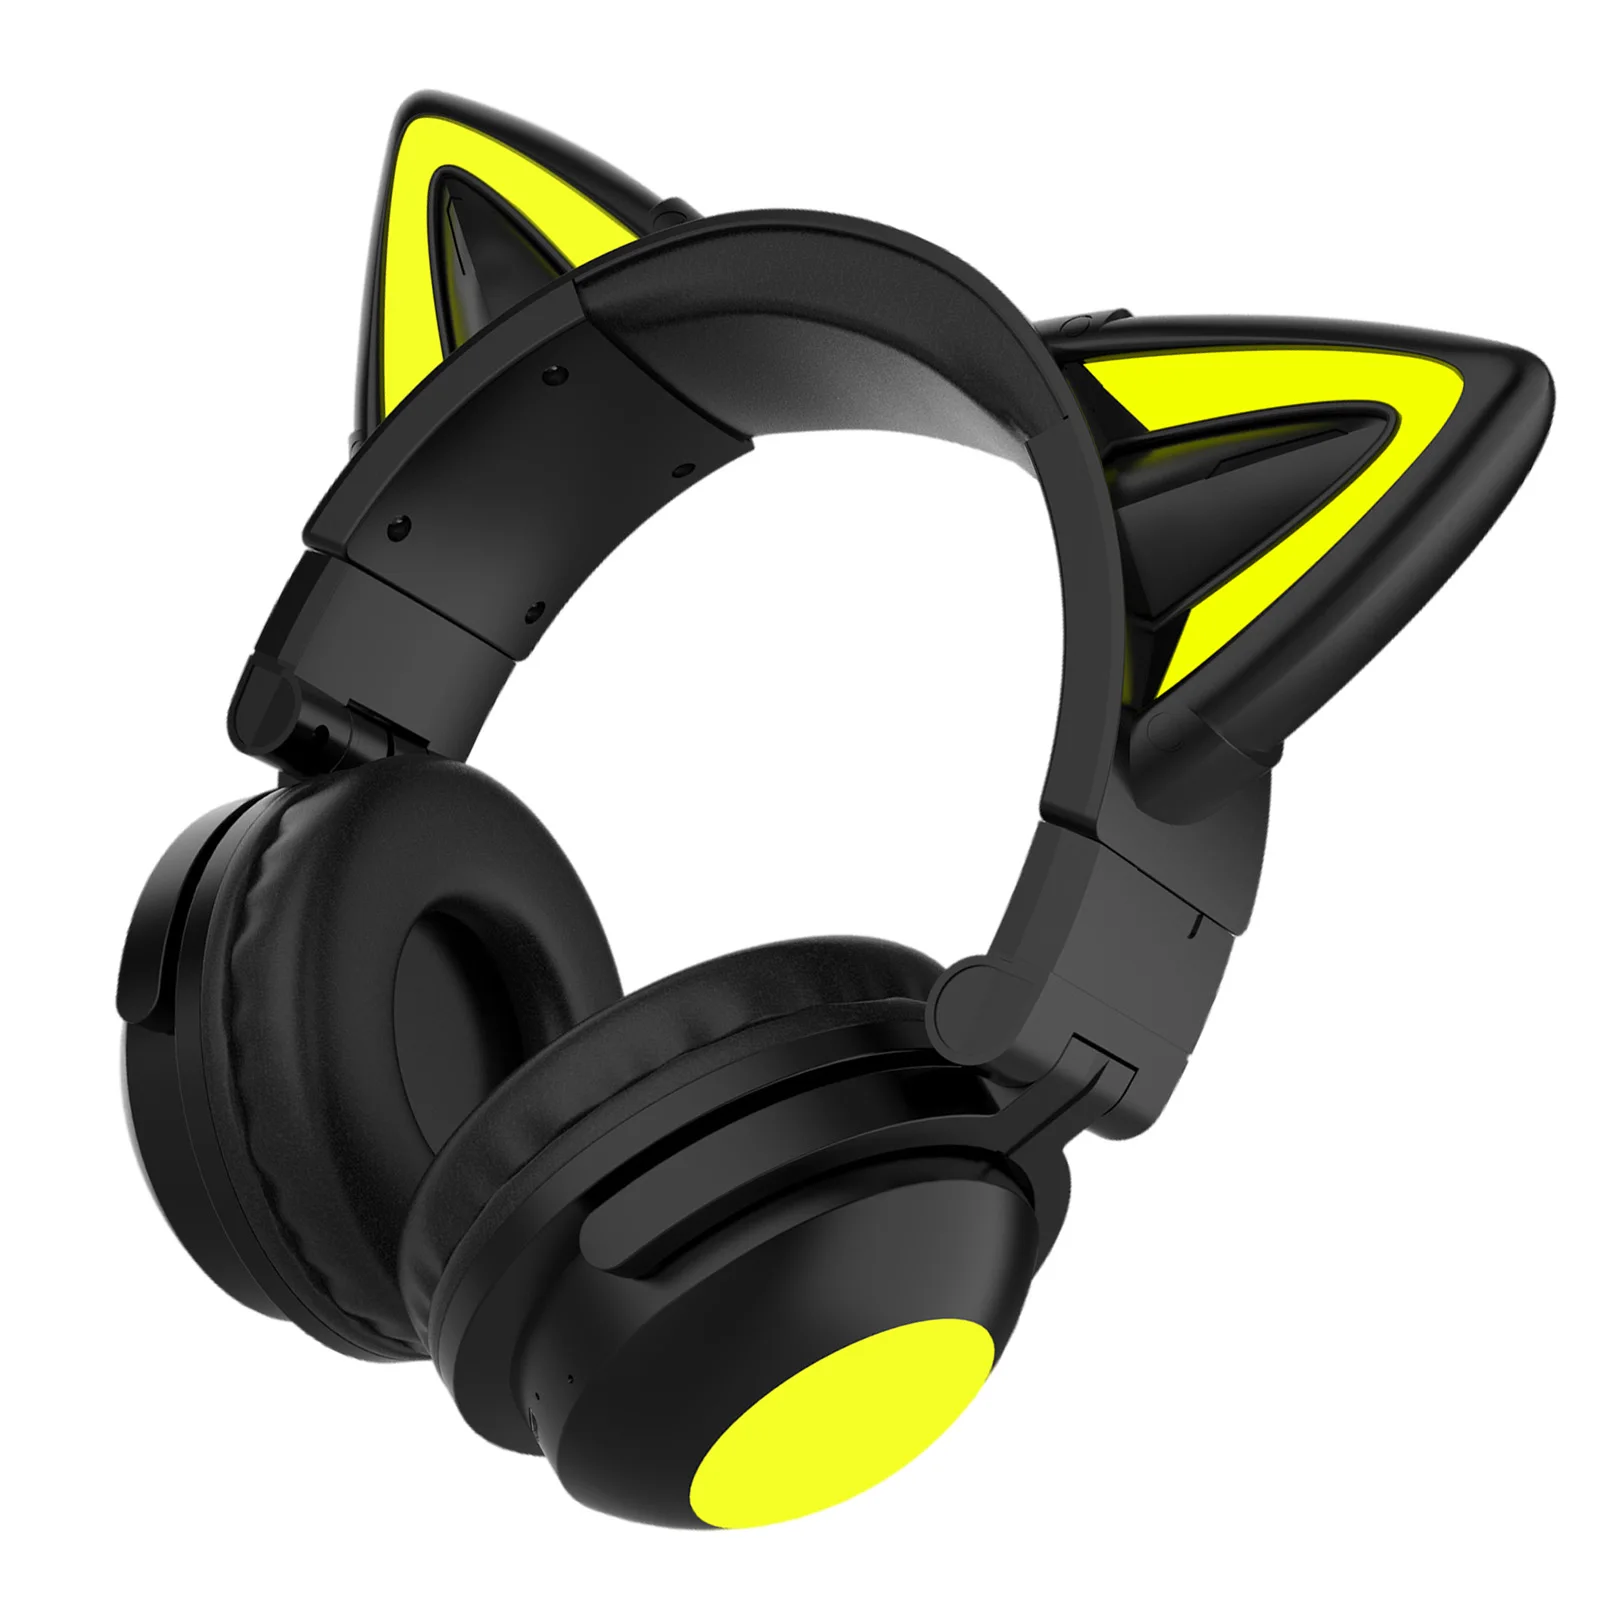 Universal Luminous Cat Ear Wireless Bluetooth Headsets Over the Ear Stereo Headphones Microphones Mic Speaker New